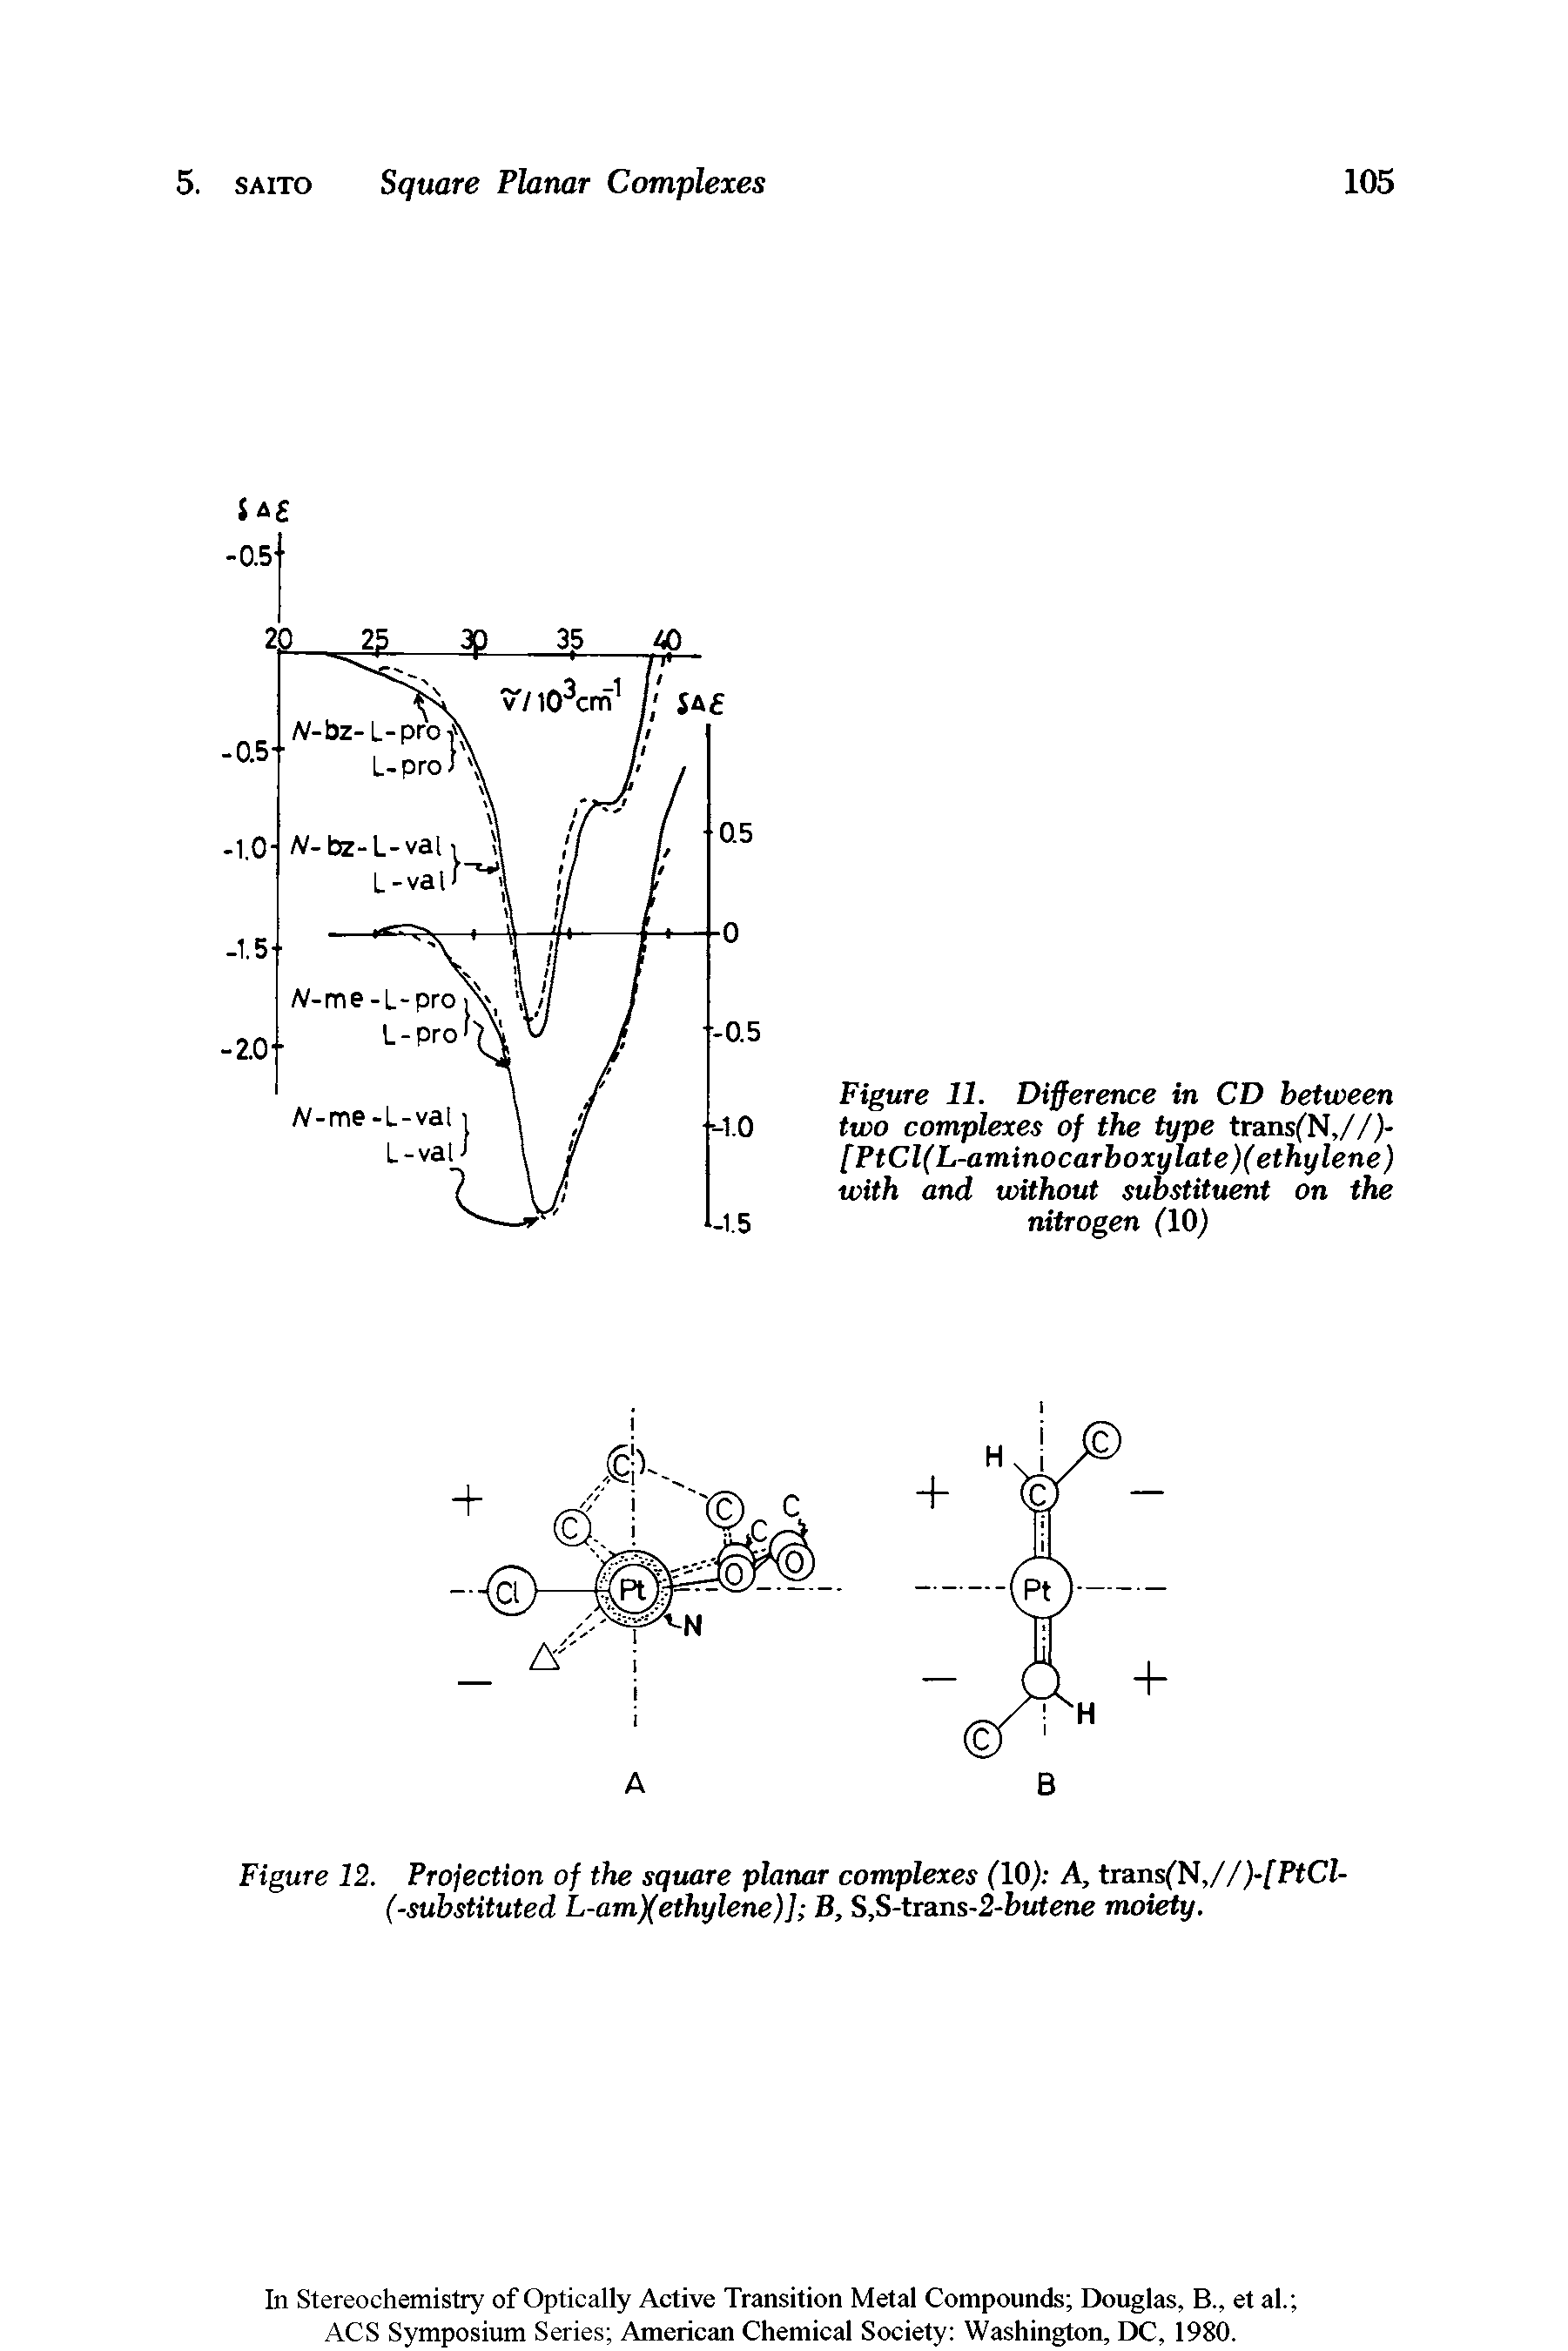 Figure 11. Difference in CD between two complexes of the type trans(N,//)-[PtCl( L-aminocarhoxylate)( ethylene ) with and without substituent on the nitrogen (10)...